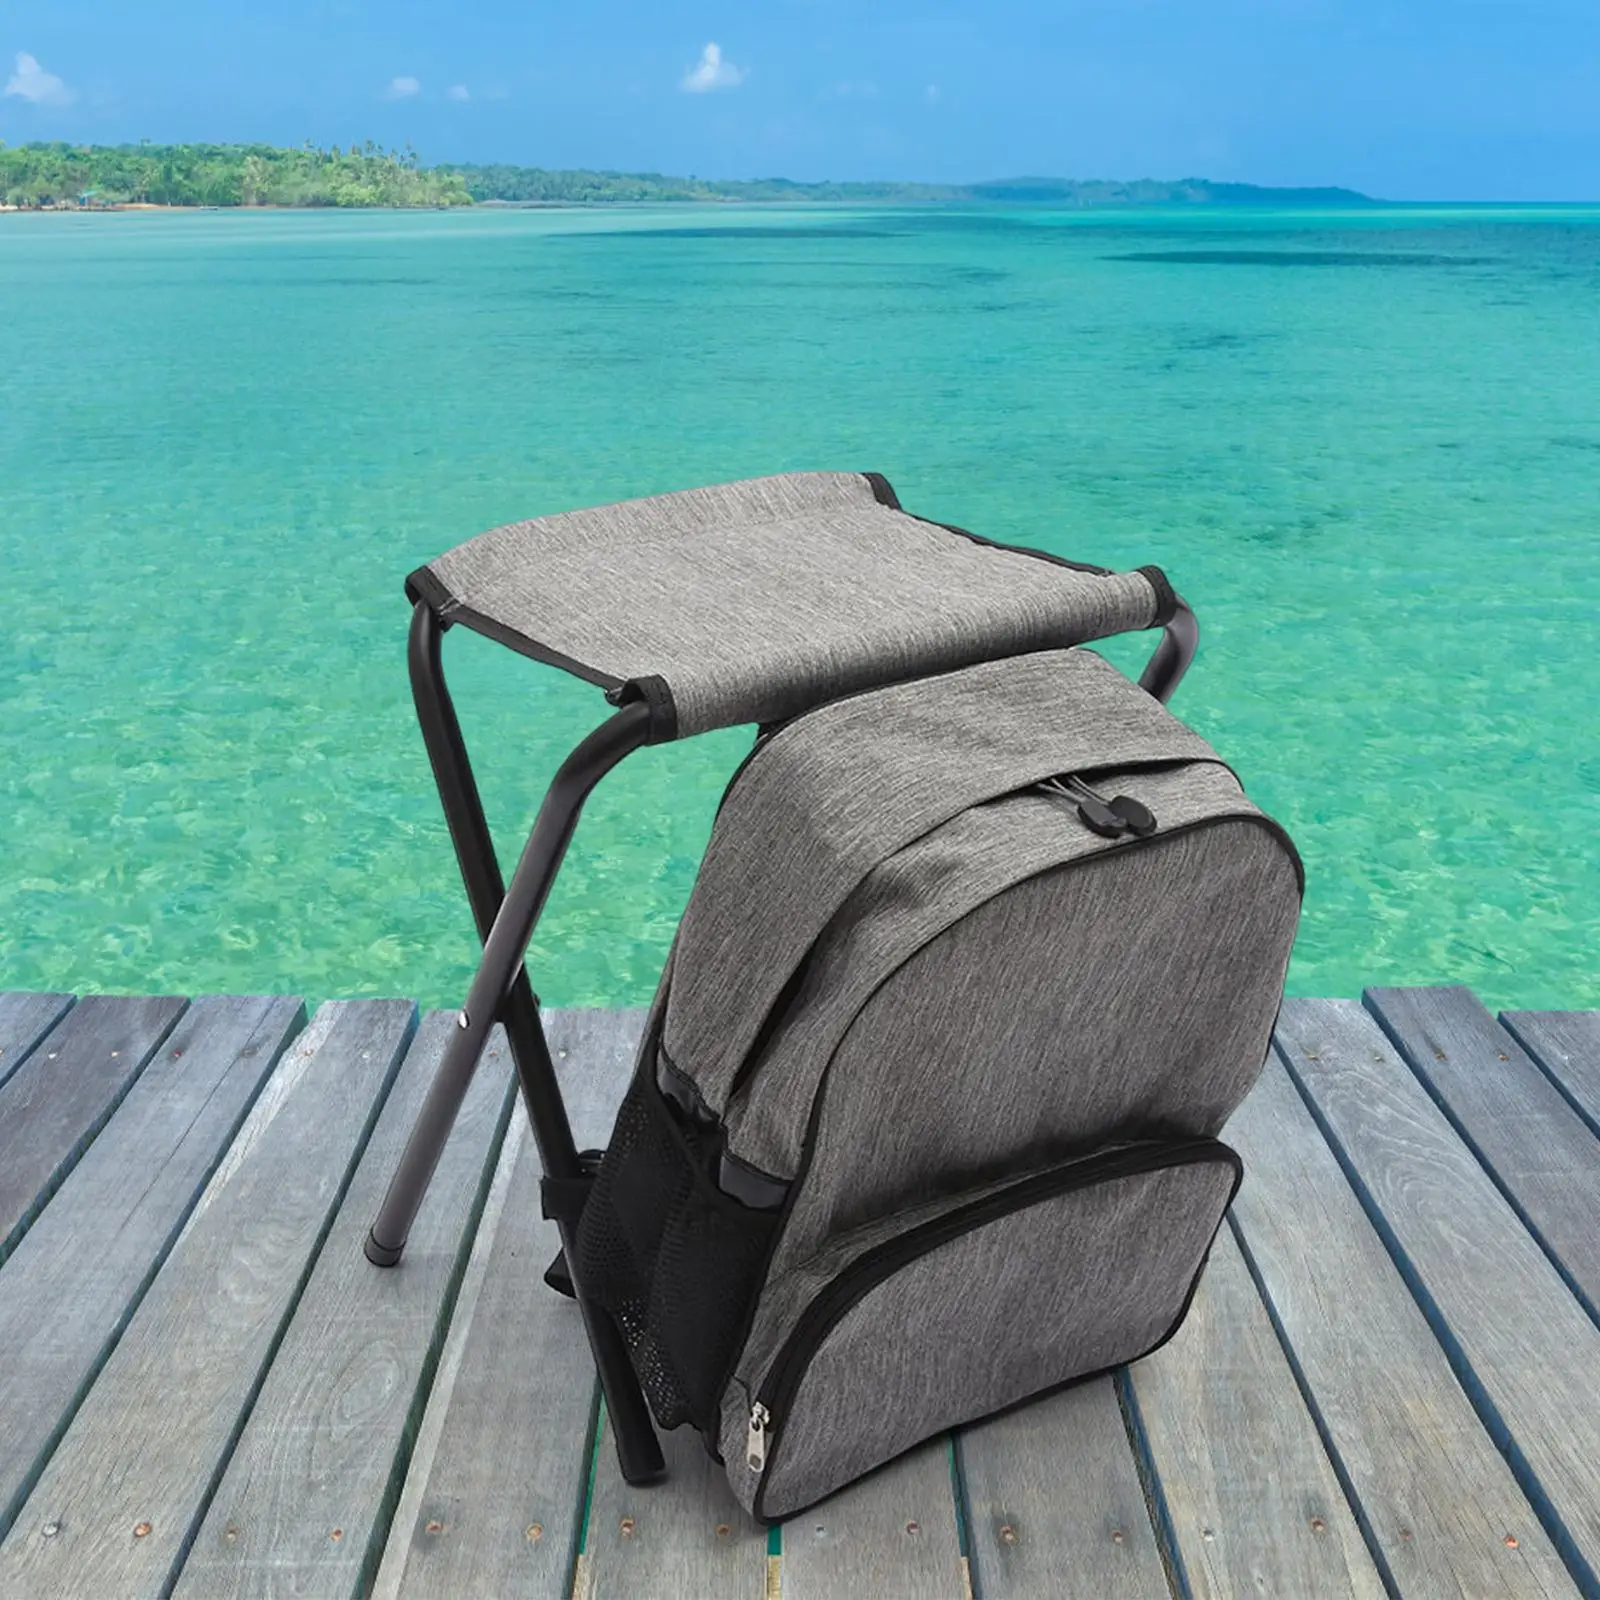 Fishing Seat Lightweight Chair Camp Stool Seat Multifunction Folding Stool with Bag for Fishing Picnic Beach Gardening Outdoor